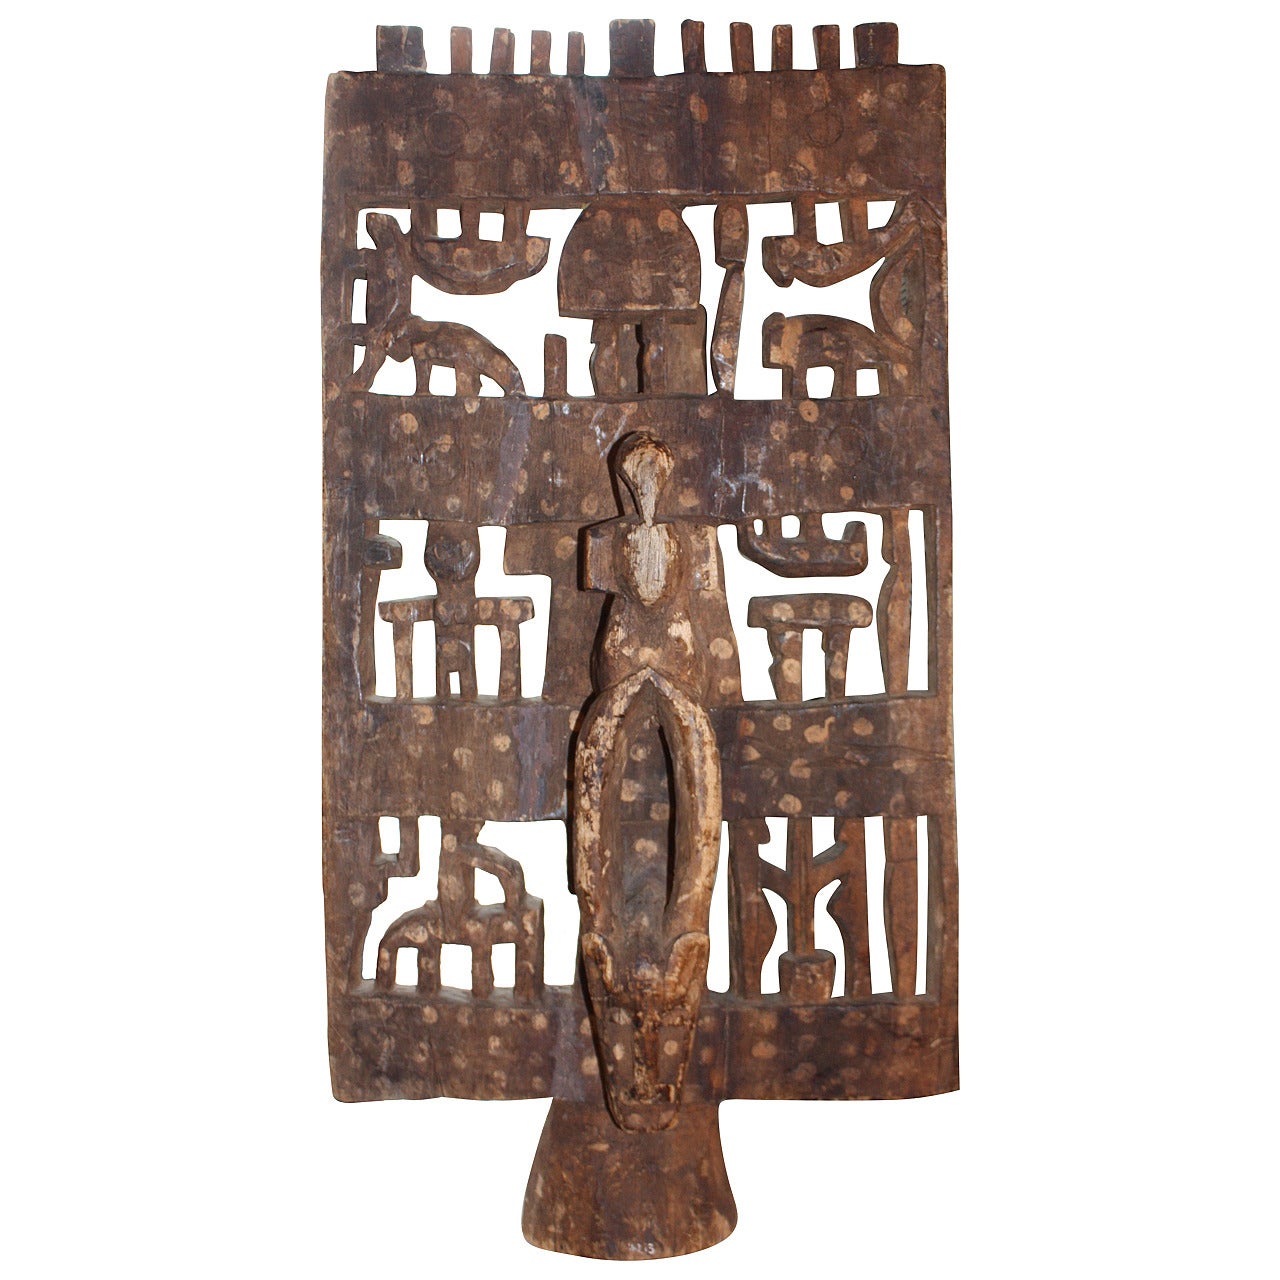 Decorative African Carved Wood Headdress